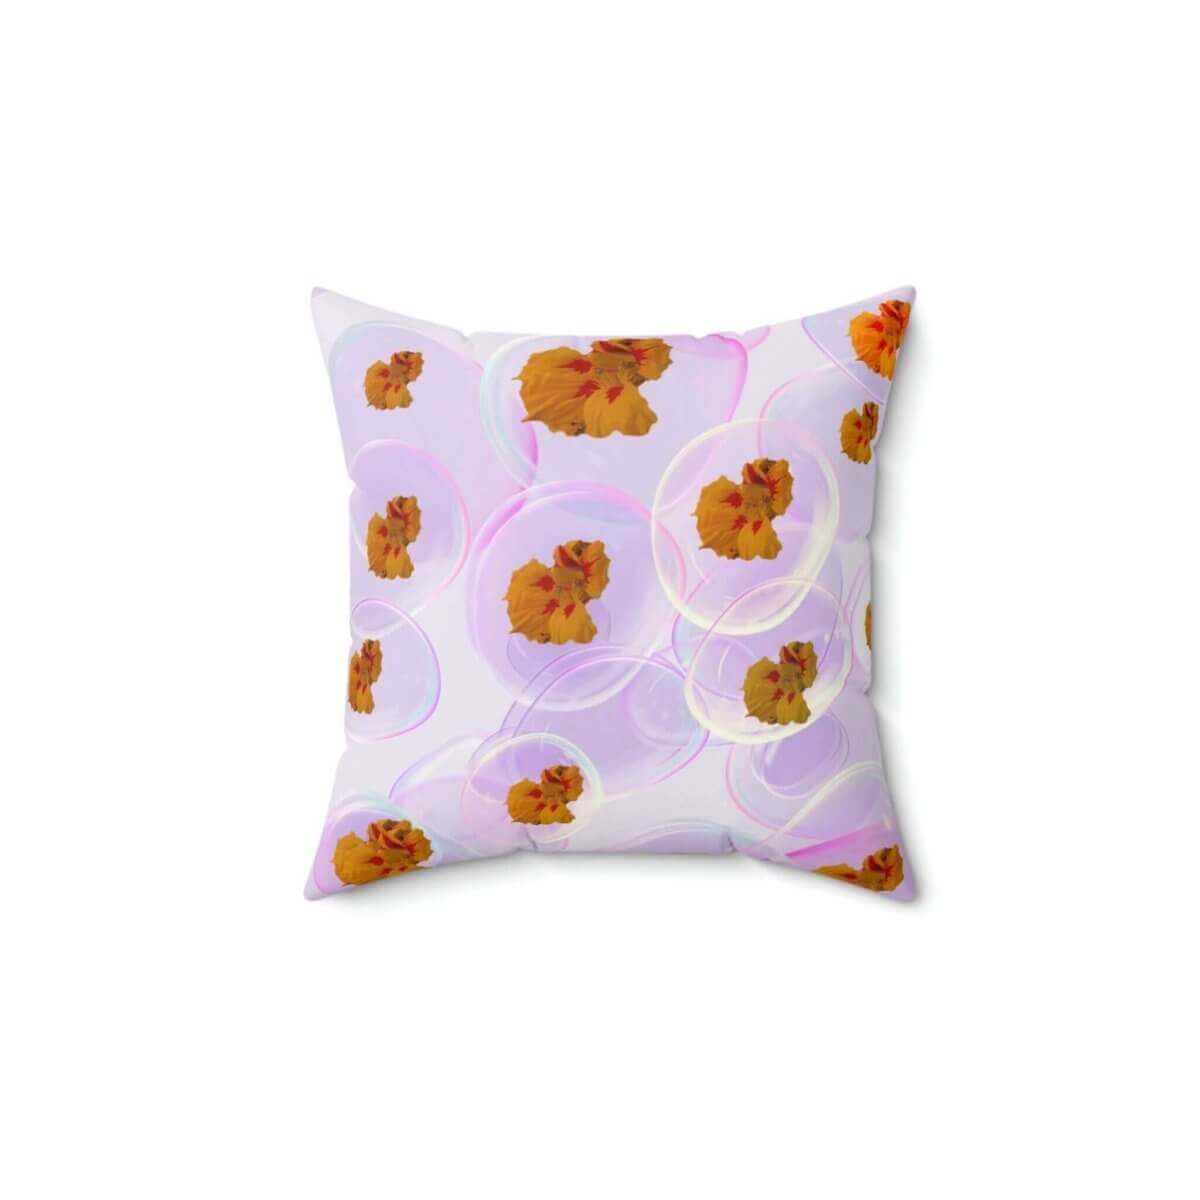 Bubbly Design Pillow - Hearth Home & Living